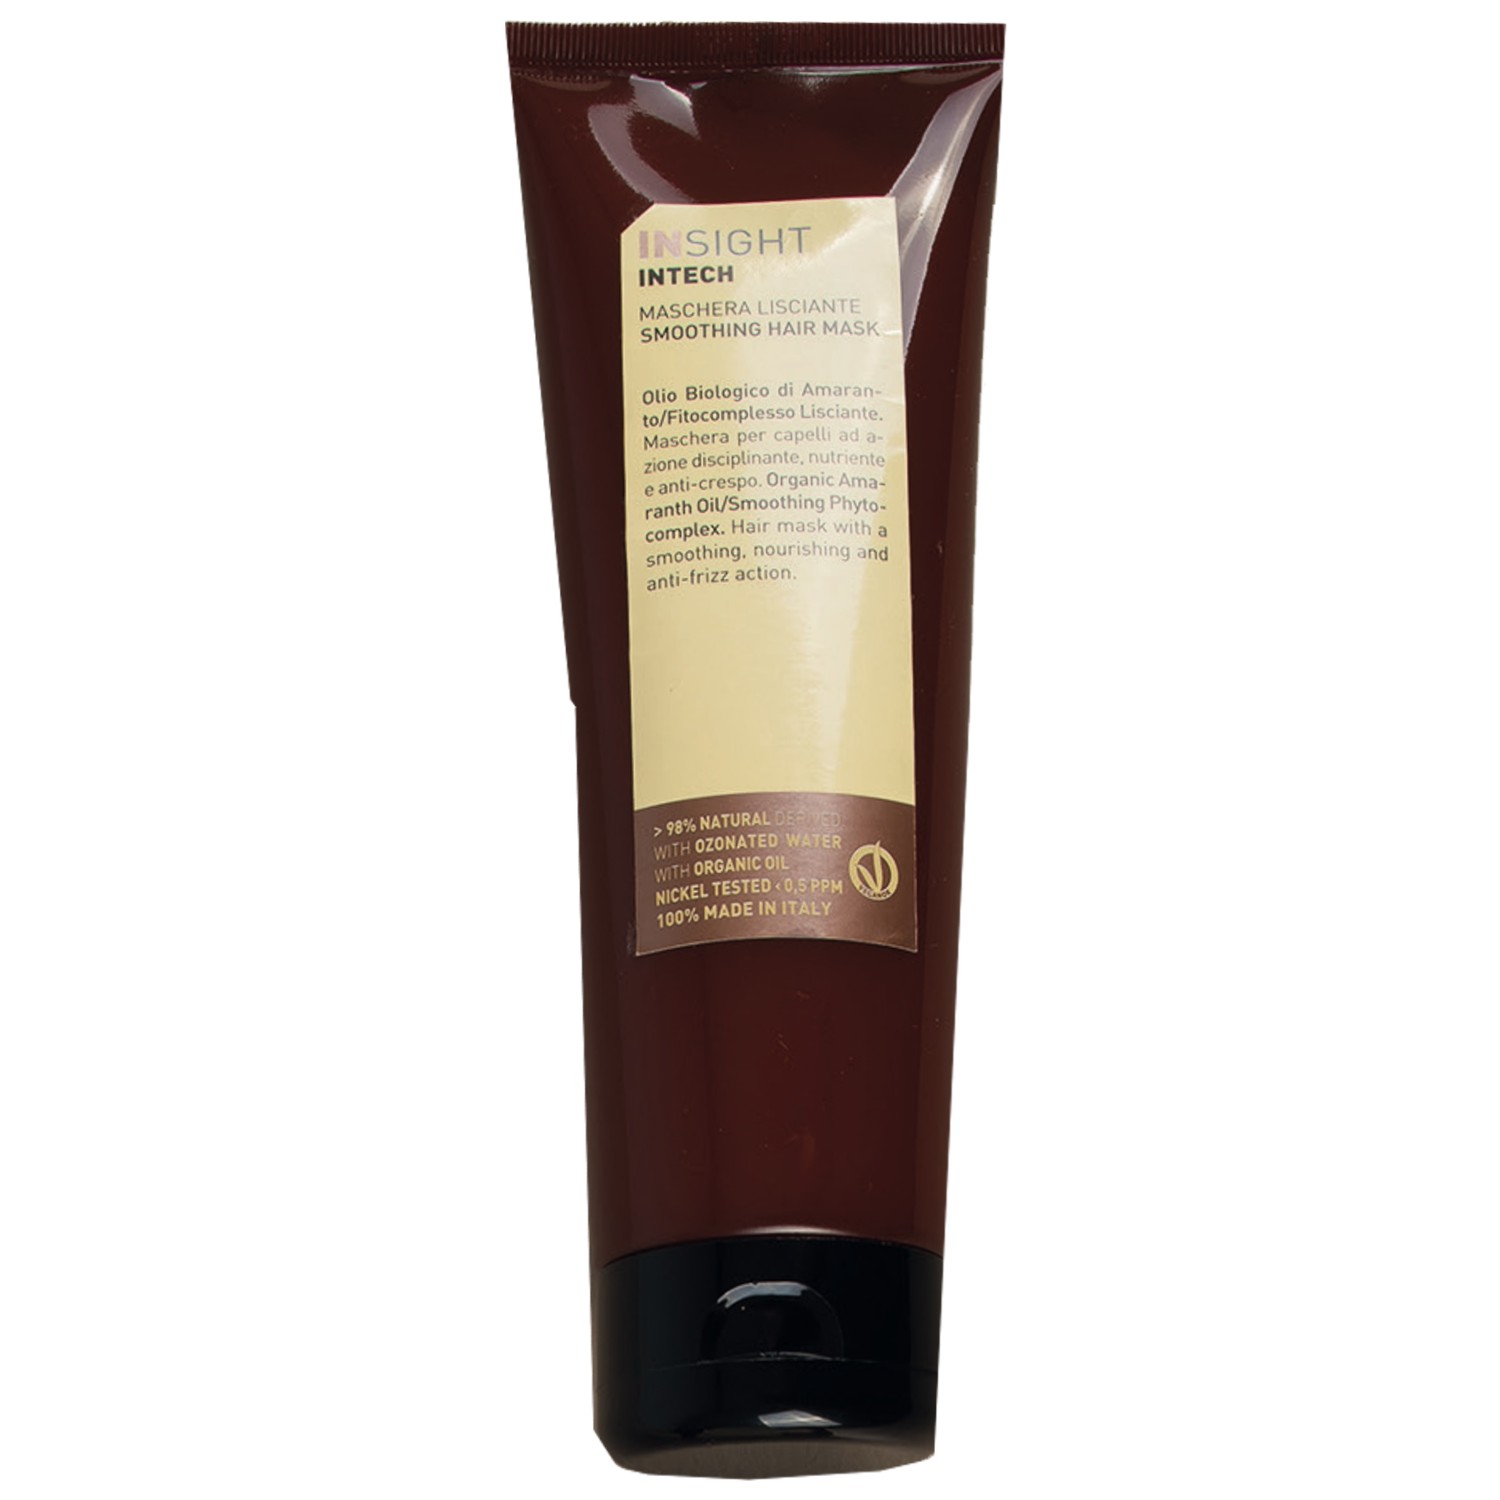 Insight INTECH Smoothing Hair Mask 250 ml